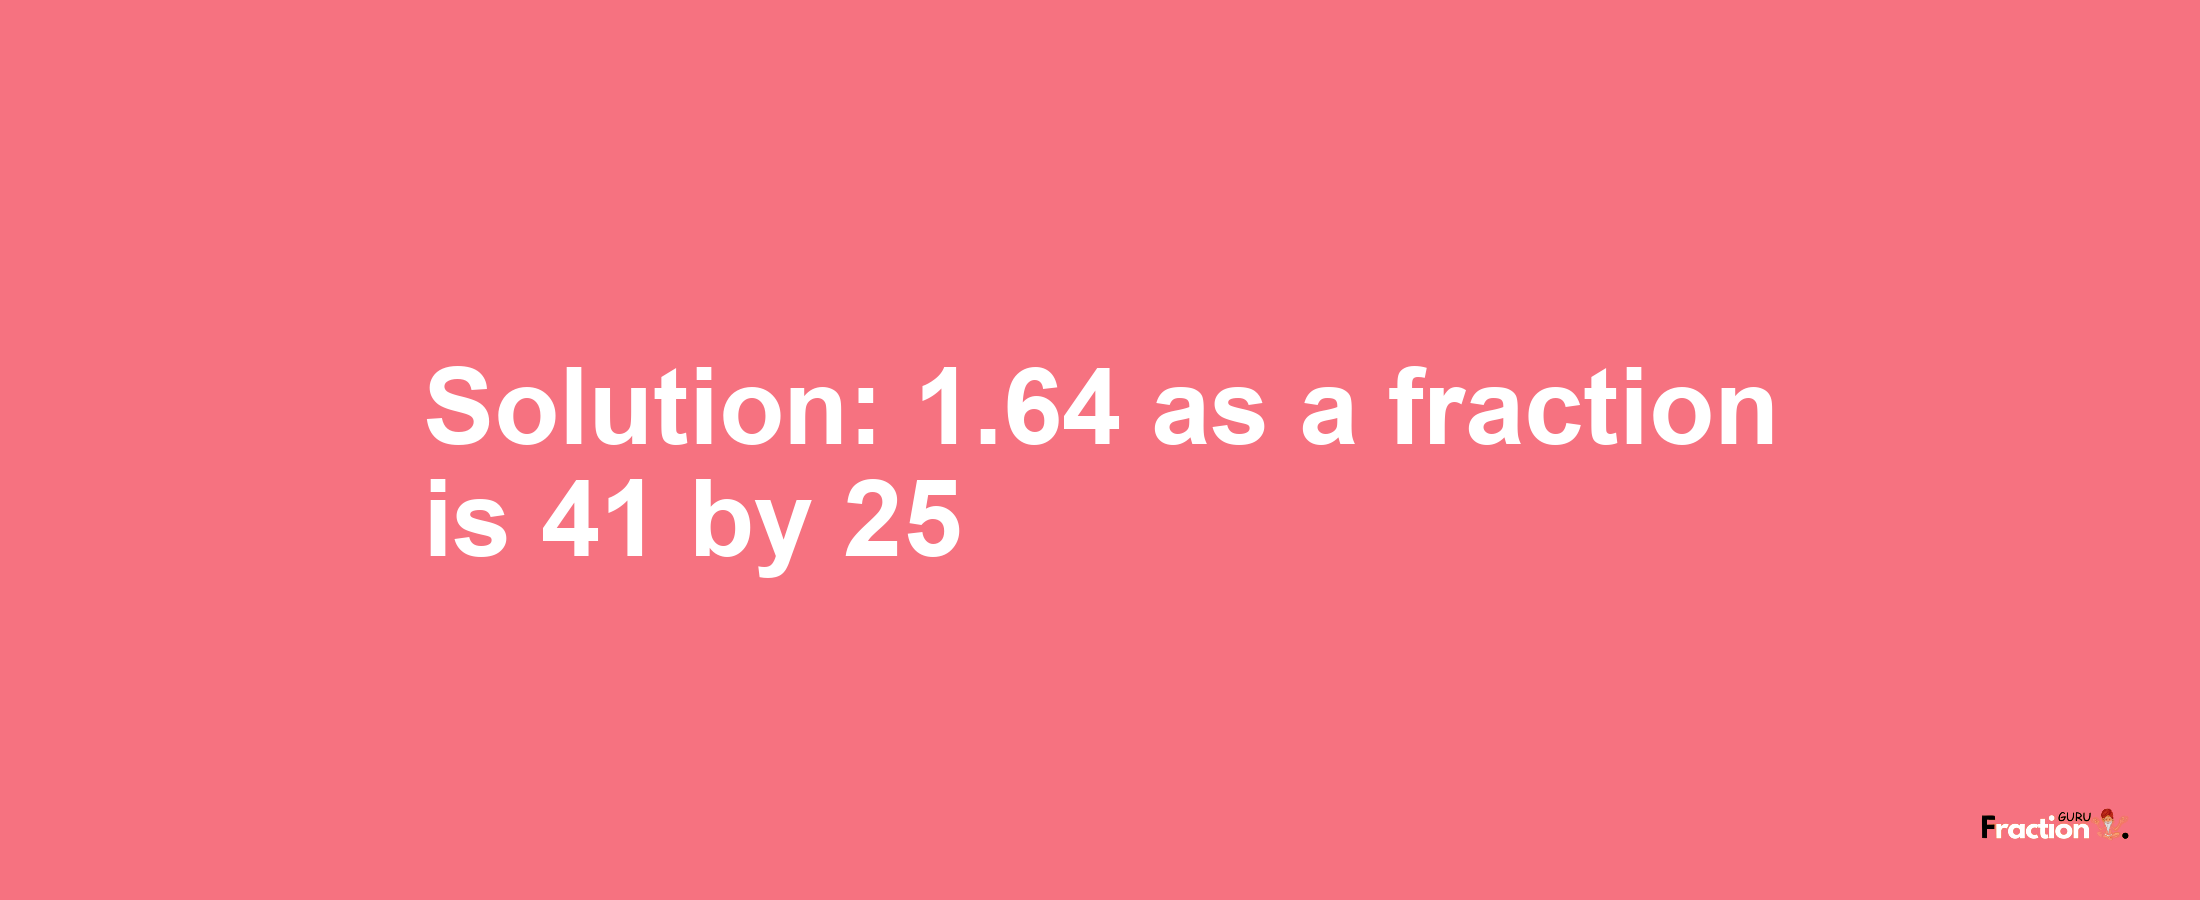 Solution:1.64 as a fraction is 41/25